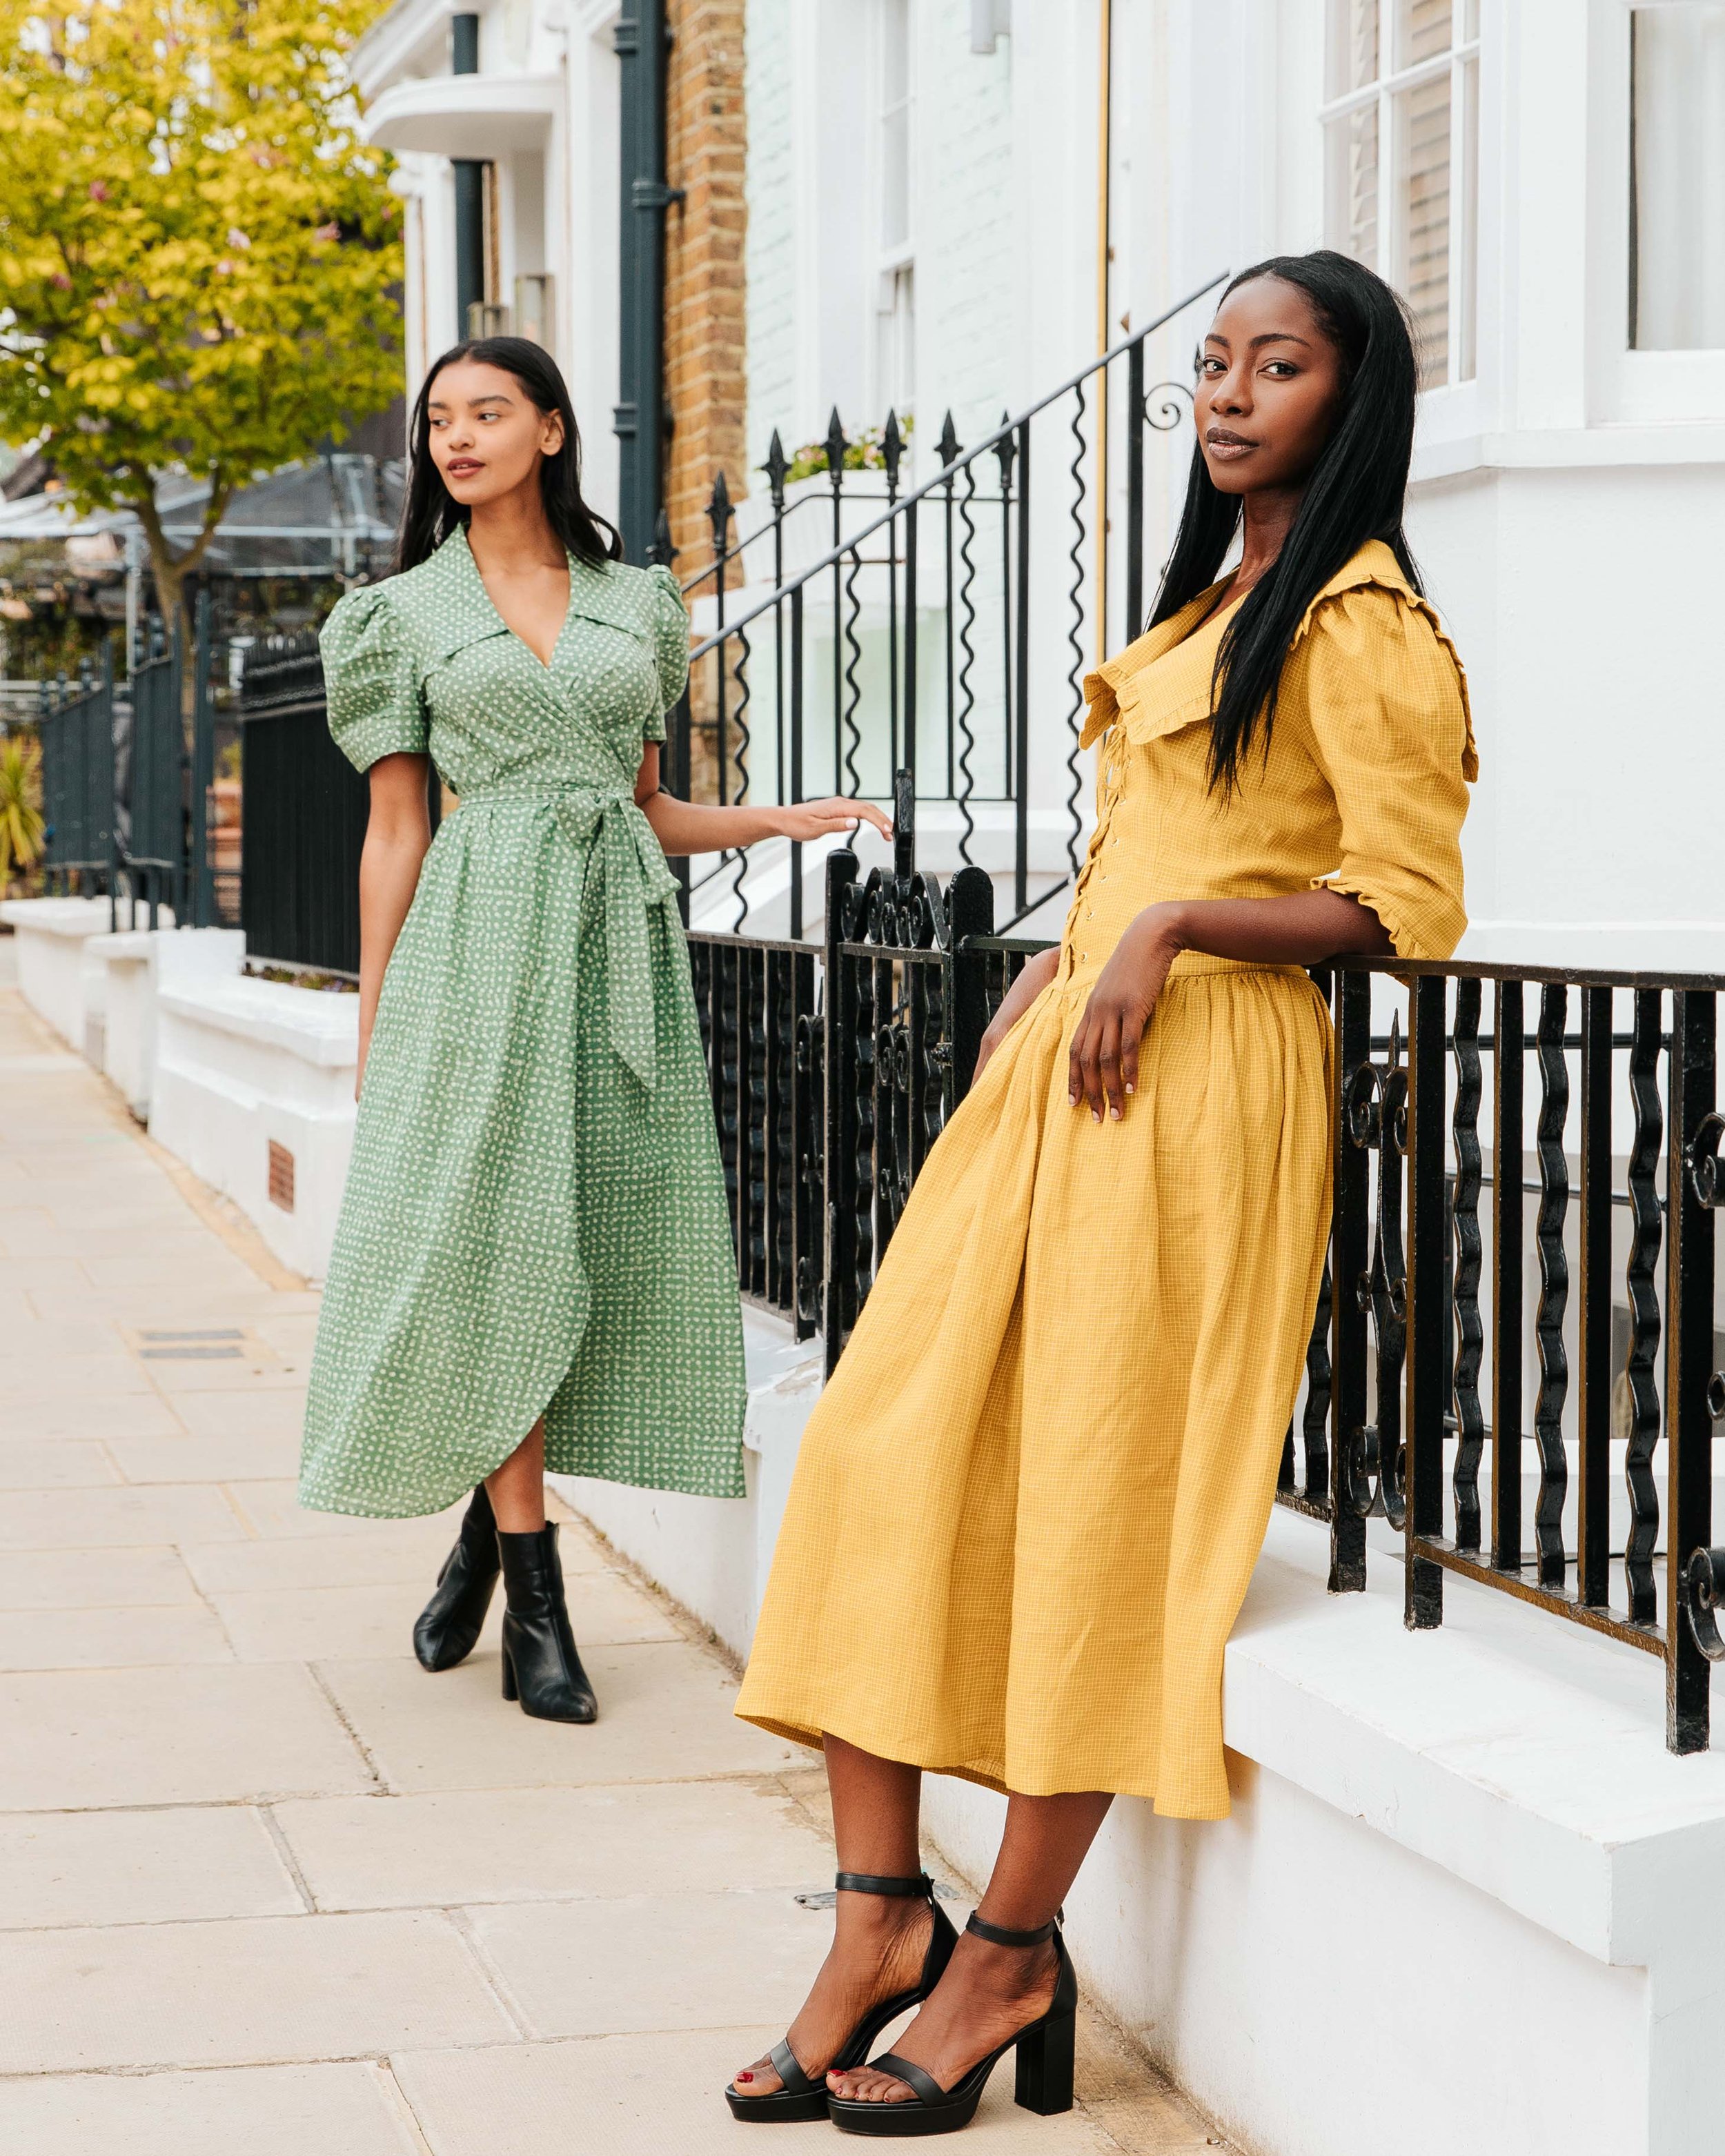 Terre_Amoure_Green_&_Yellow_Dress_in_Notting_Hill.jpg